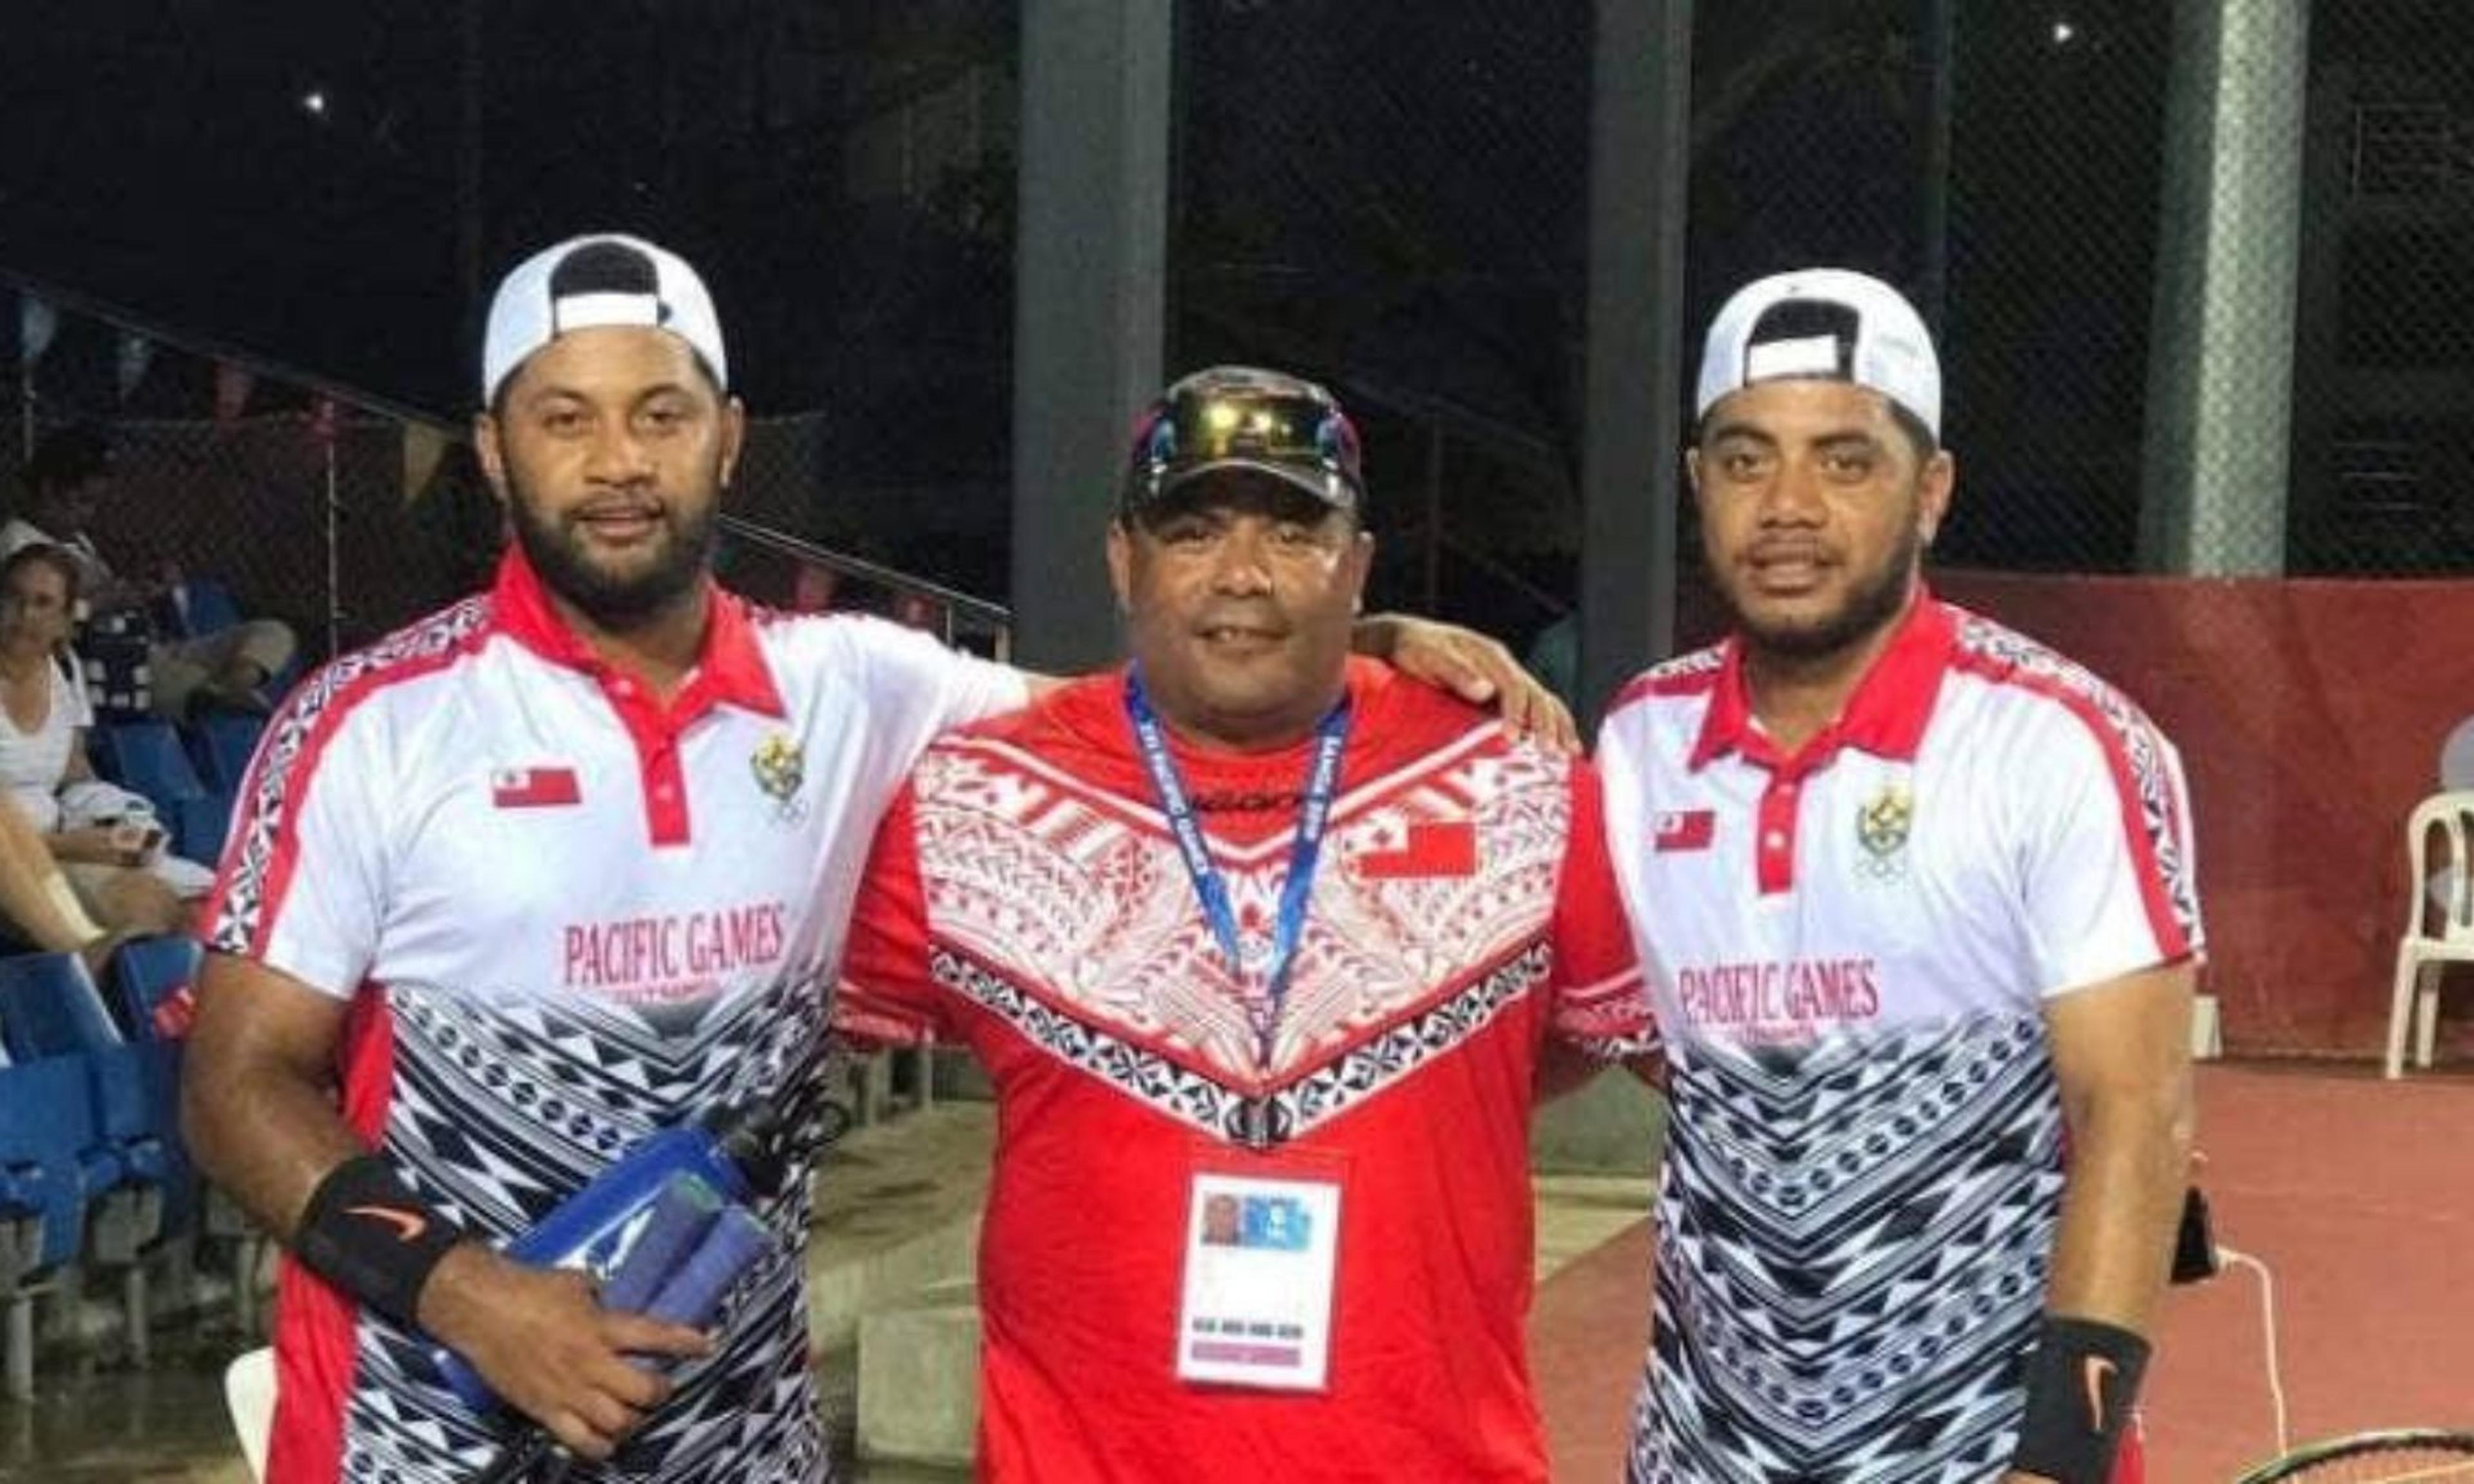 Matavao, right, and Semisi Fanguna, left, pictured with their coach after they won Tonga’s first gold medal in tennis at the 2019 South Pacific Games.